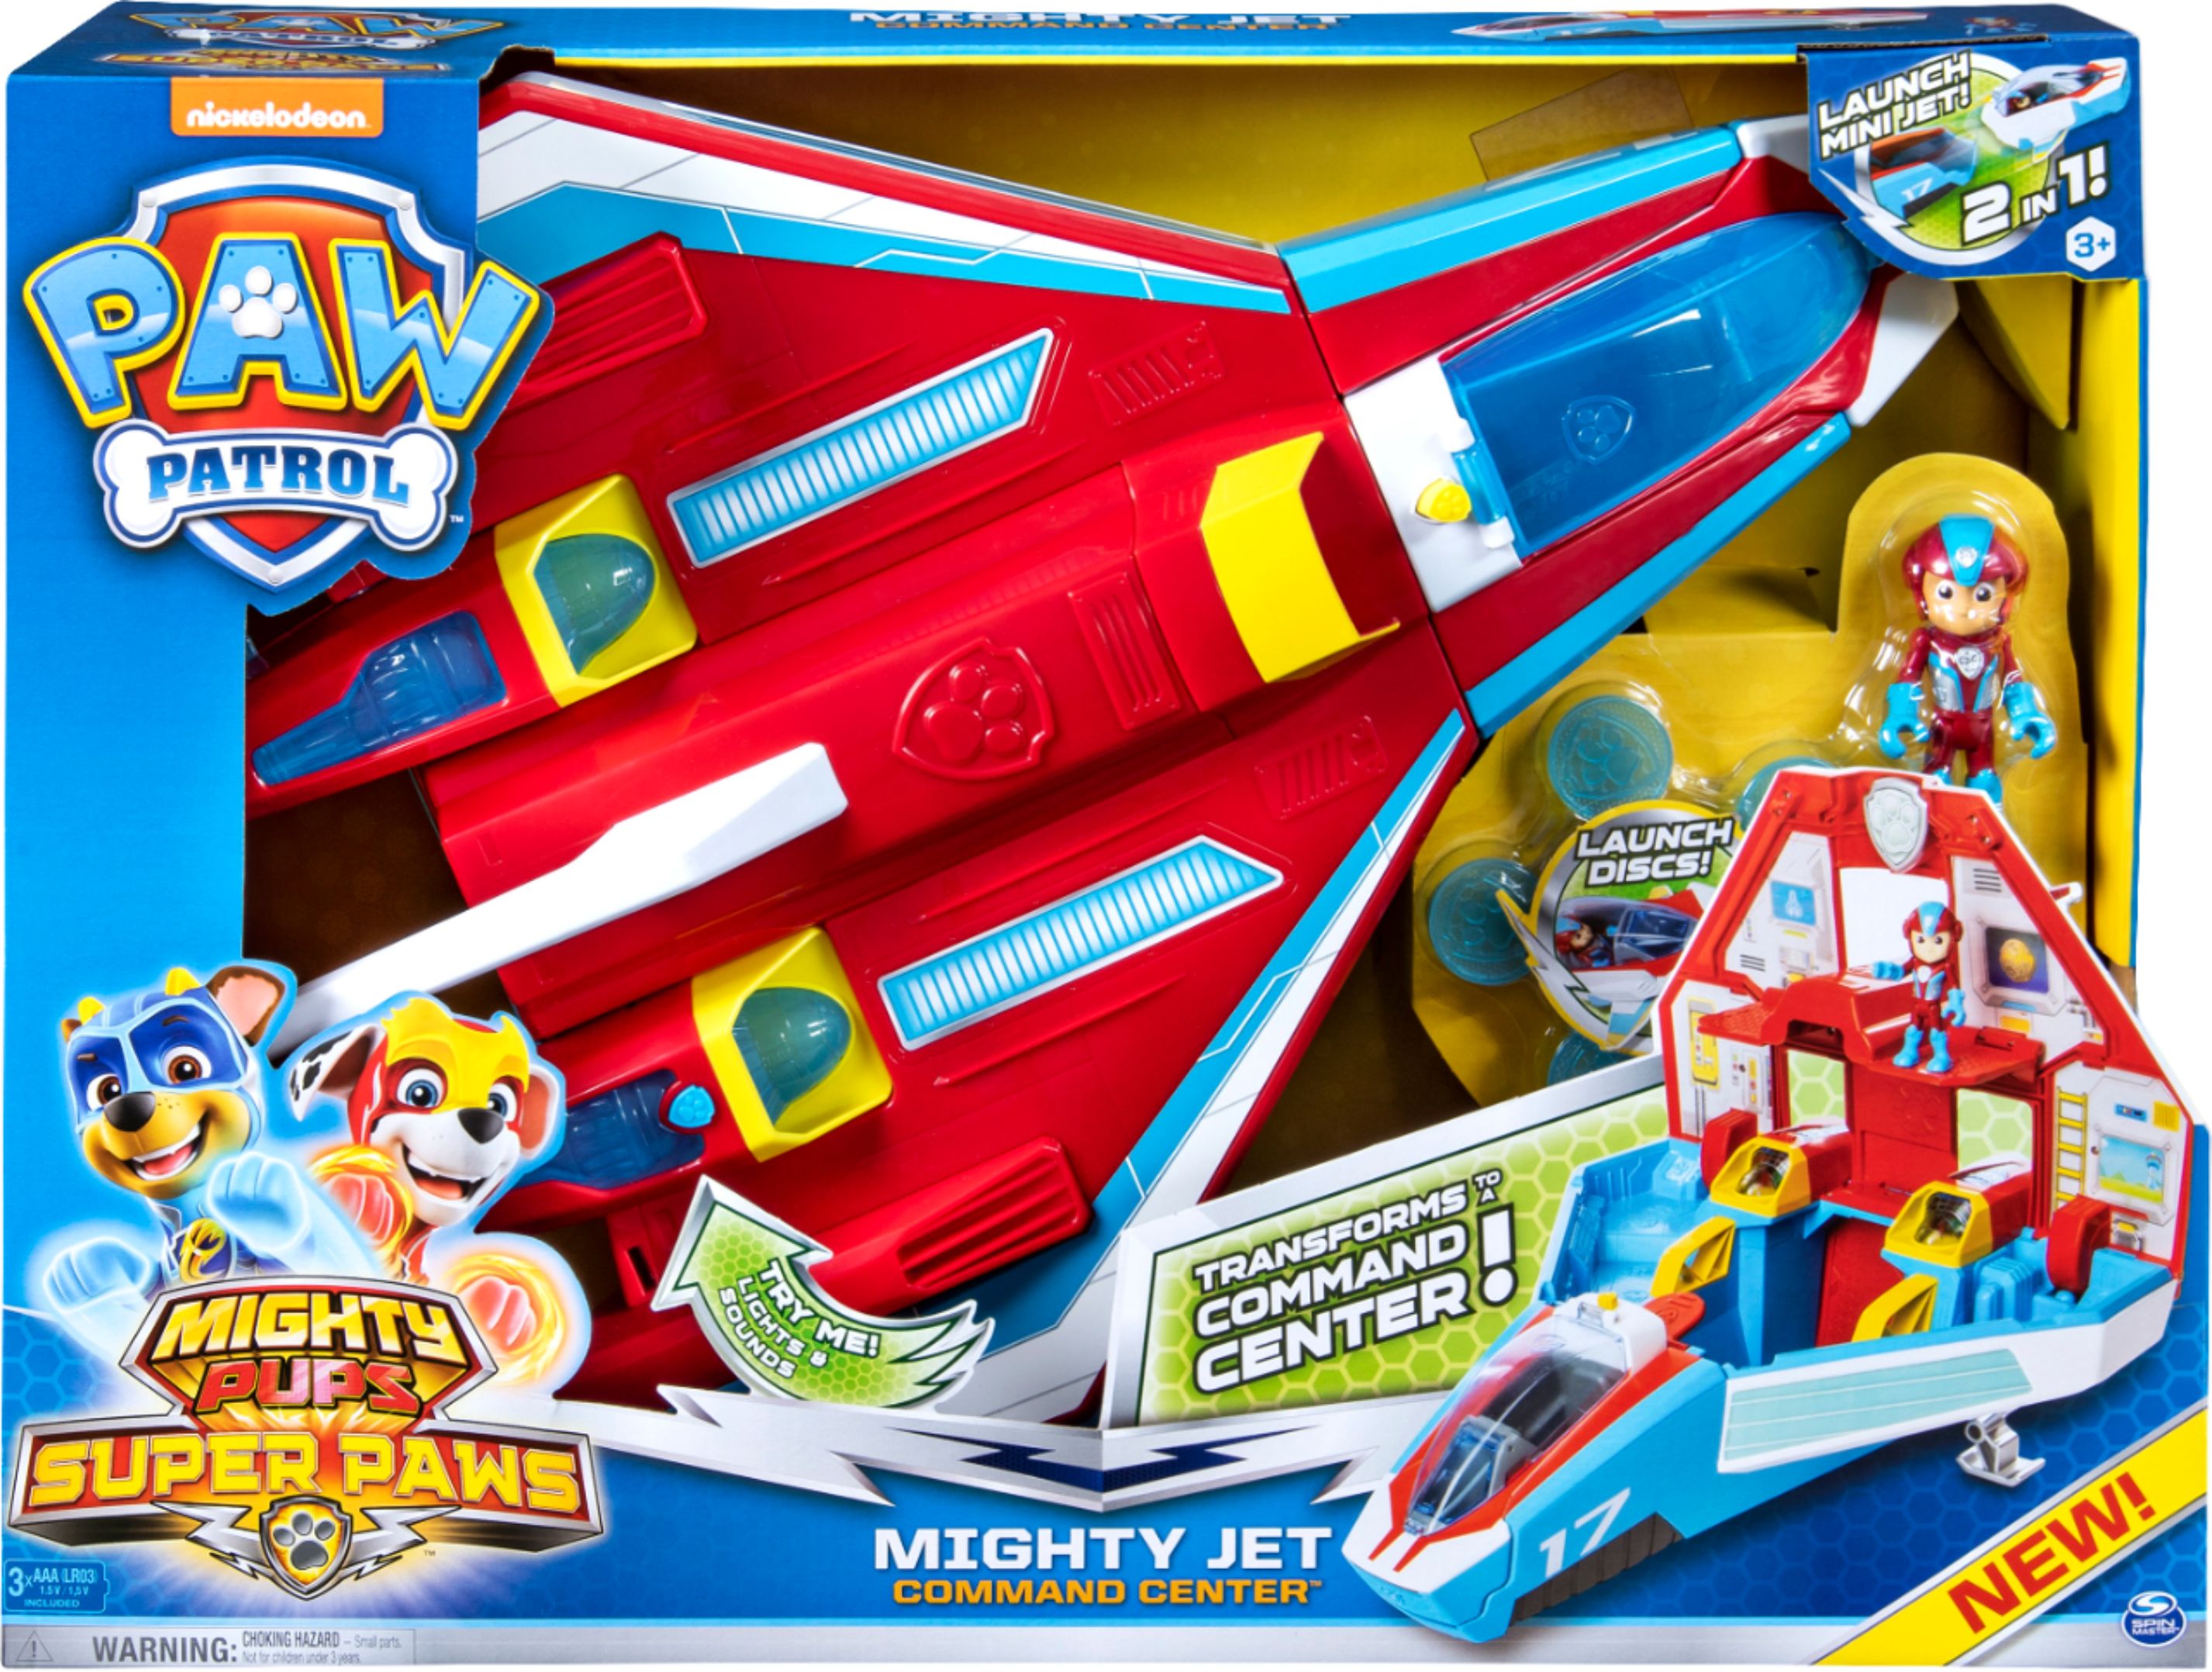 Paw Patrol - Mighty Pups Super Paws Mighty Jet Command Center - Multicolor